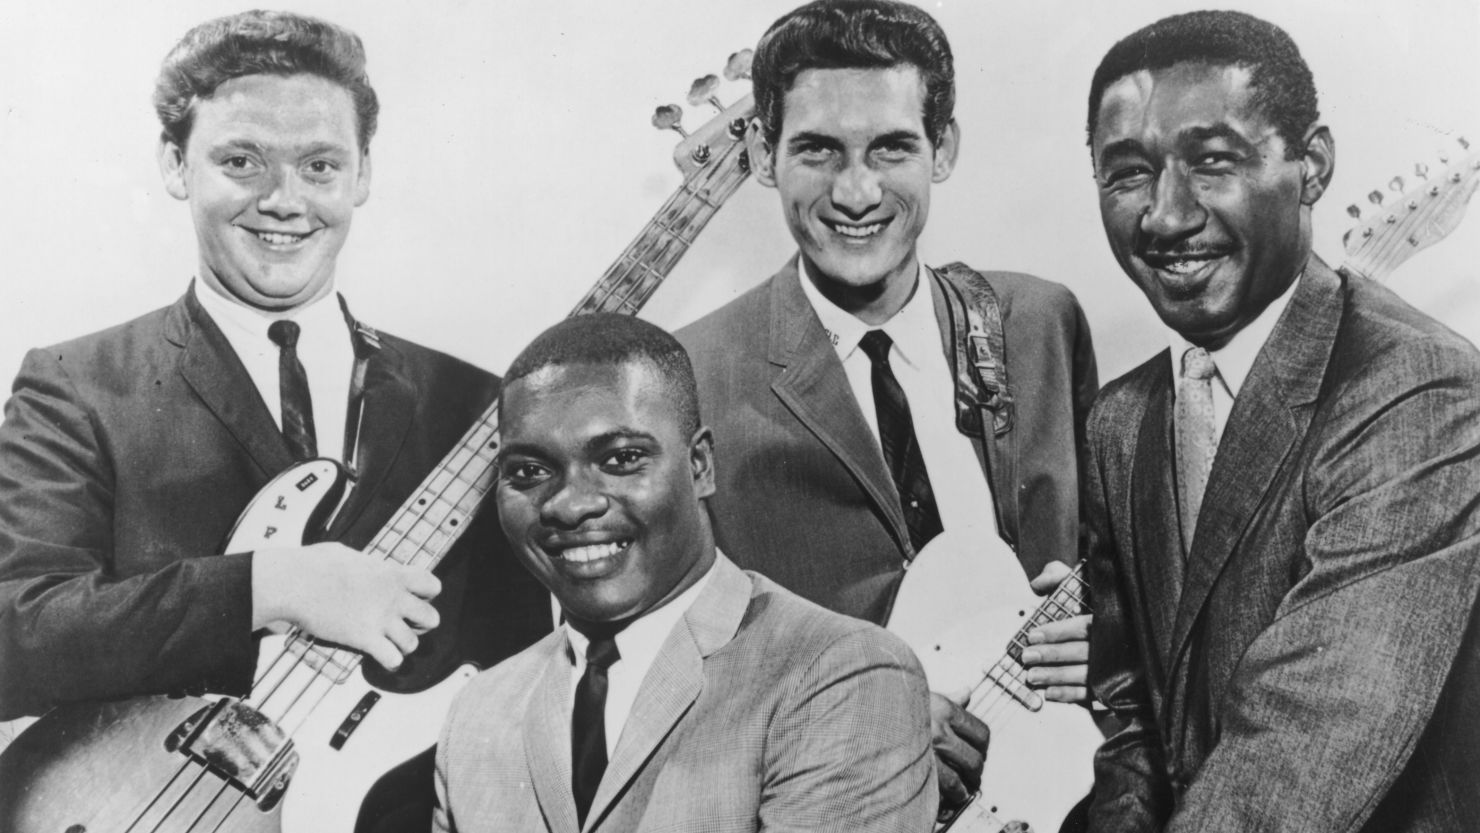 Bassist Donald "Duck" Dunn, left, played in the influential soul band Booker T. and the MGs, pictured circa 1965.